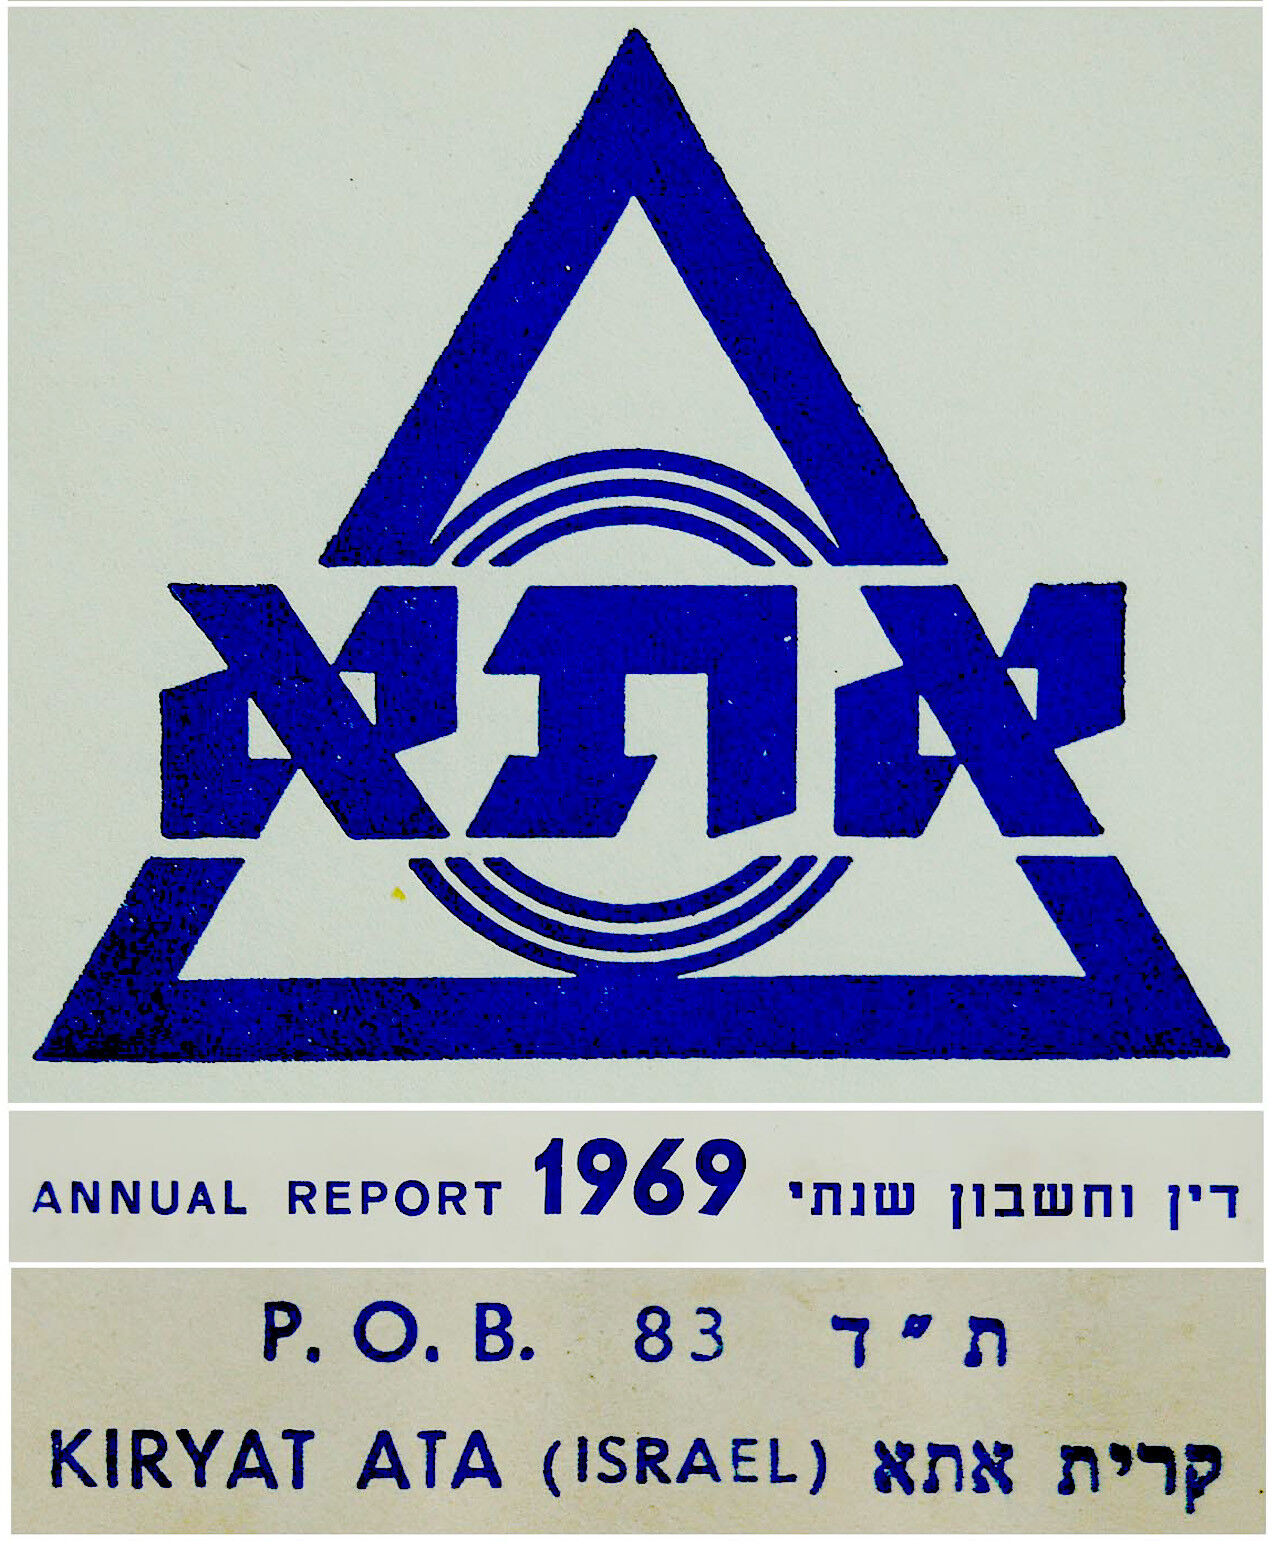 1969 Ata Advertise Envelope Cover Israel Textile Factory Hebrew Industry Logo